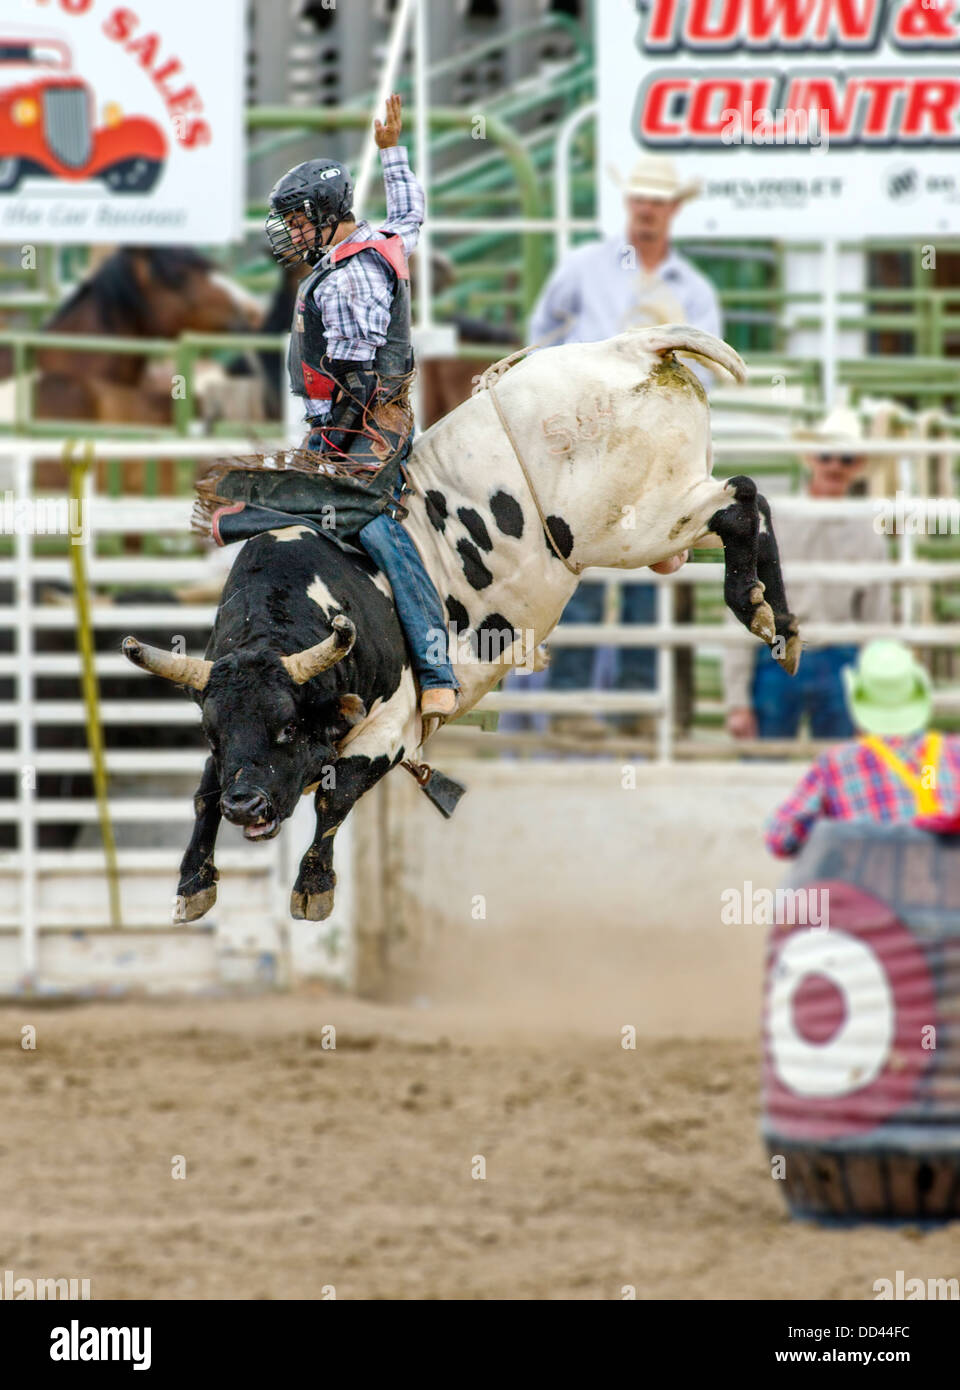 Cowboy riding a bull in a the bull riding competition, Chaffee County Fair & Rodeo Stock Photo